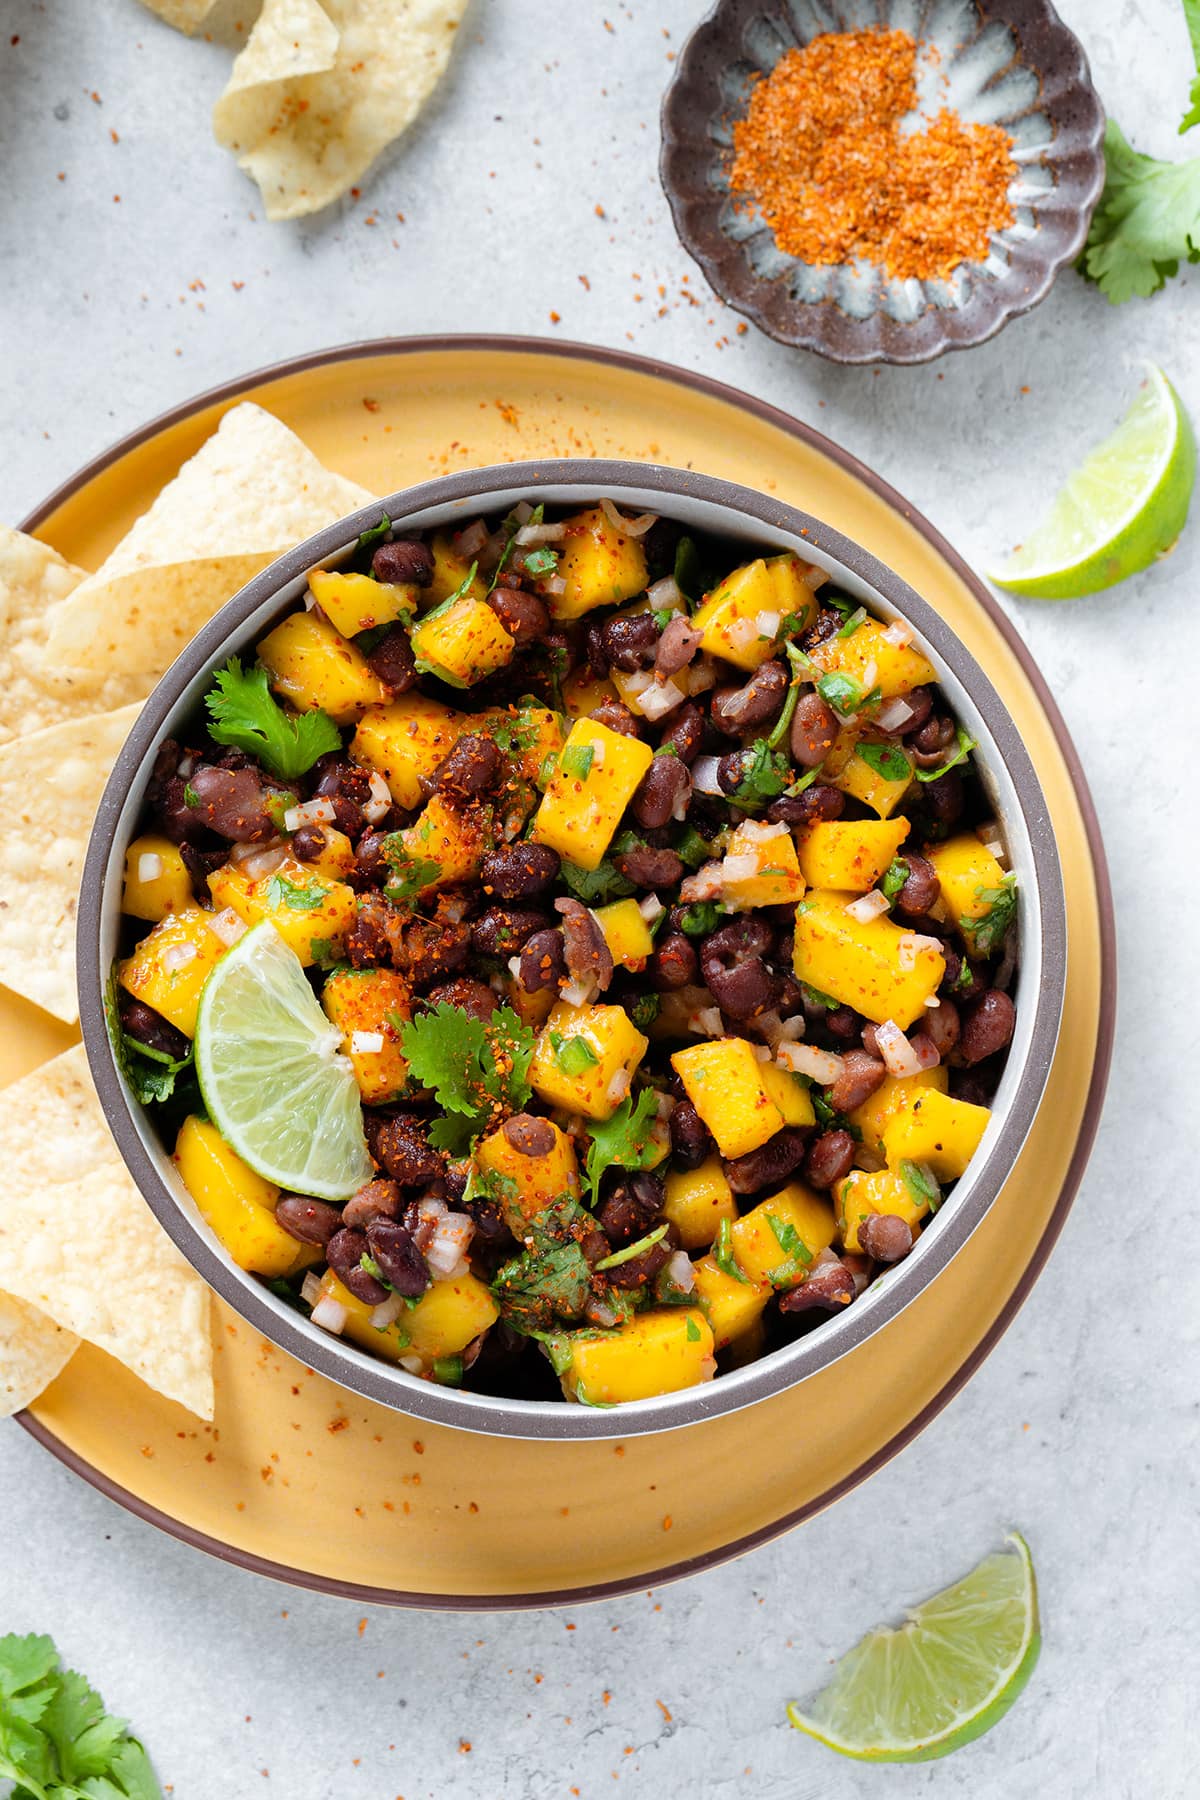 Black beans and mango salsa in a ceramic bowl on a yellow plate garnished with a slice of lime.